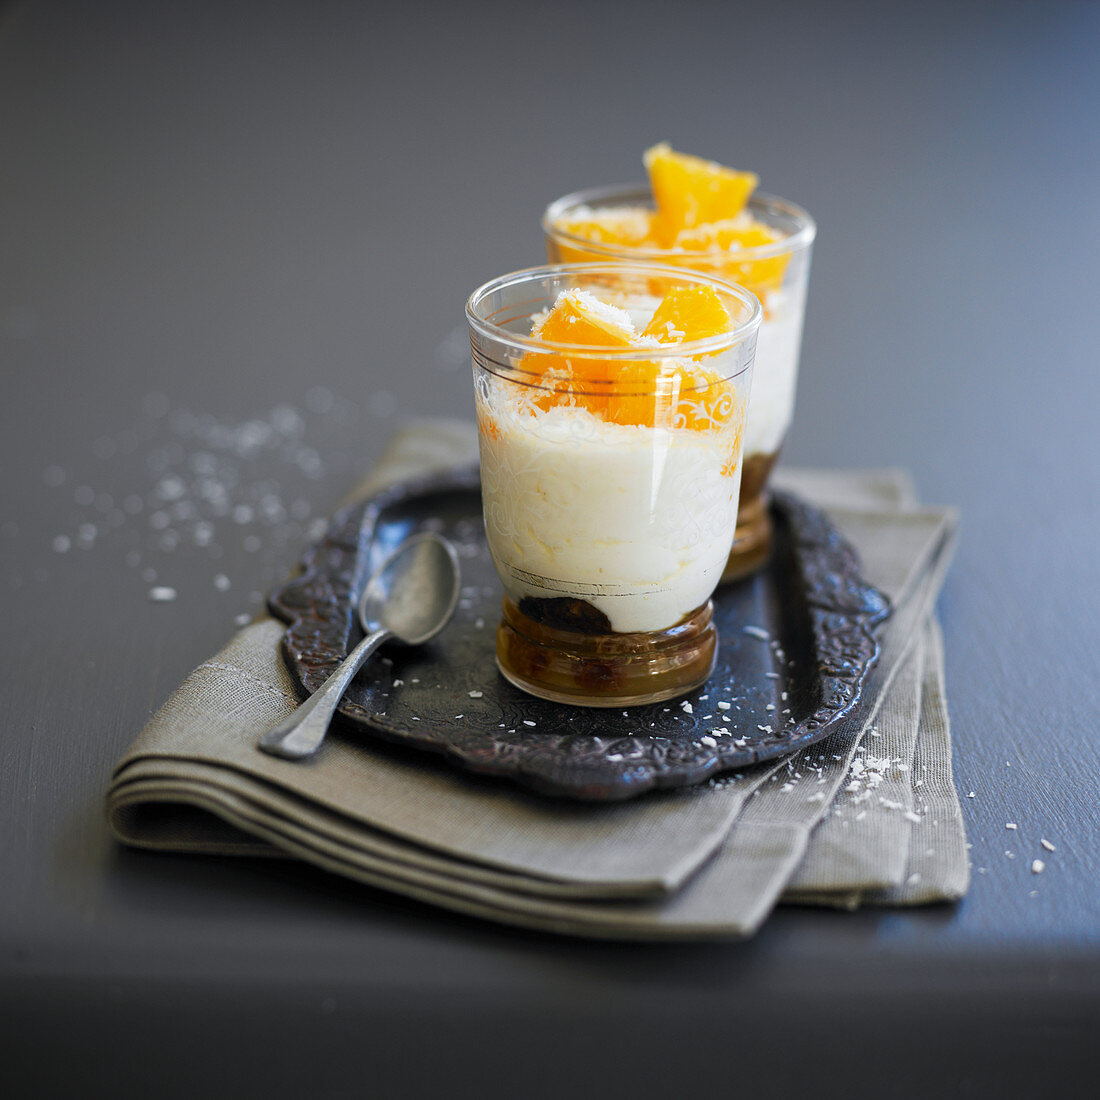 Coconut mousse with fresh oranges